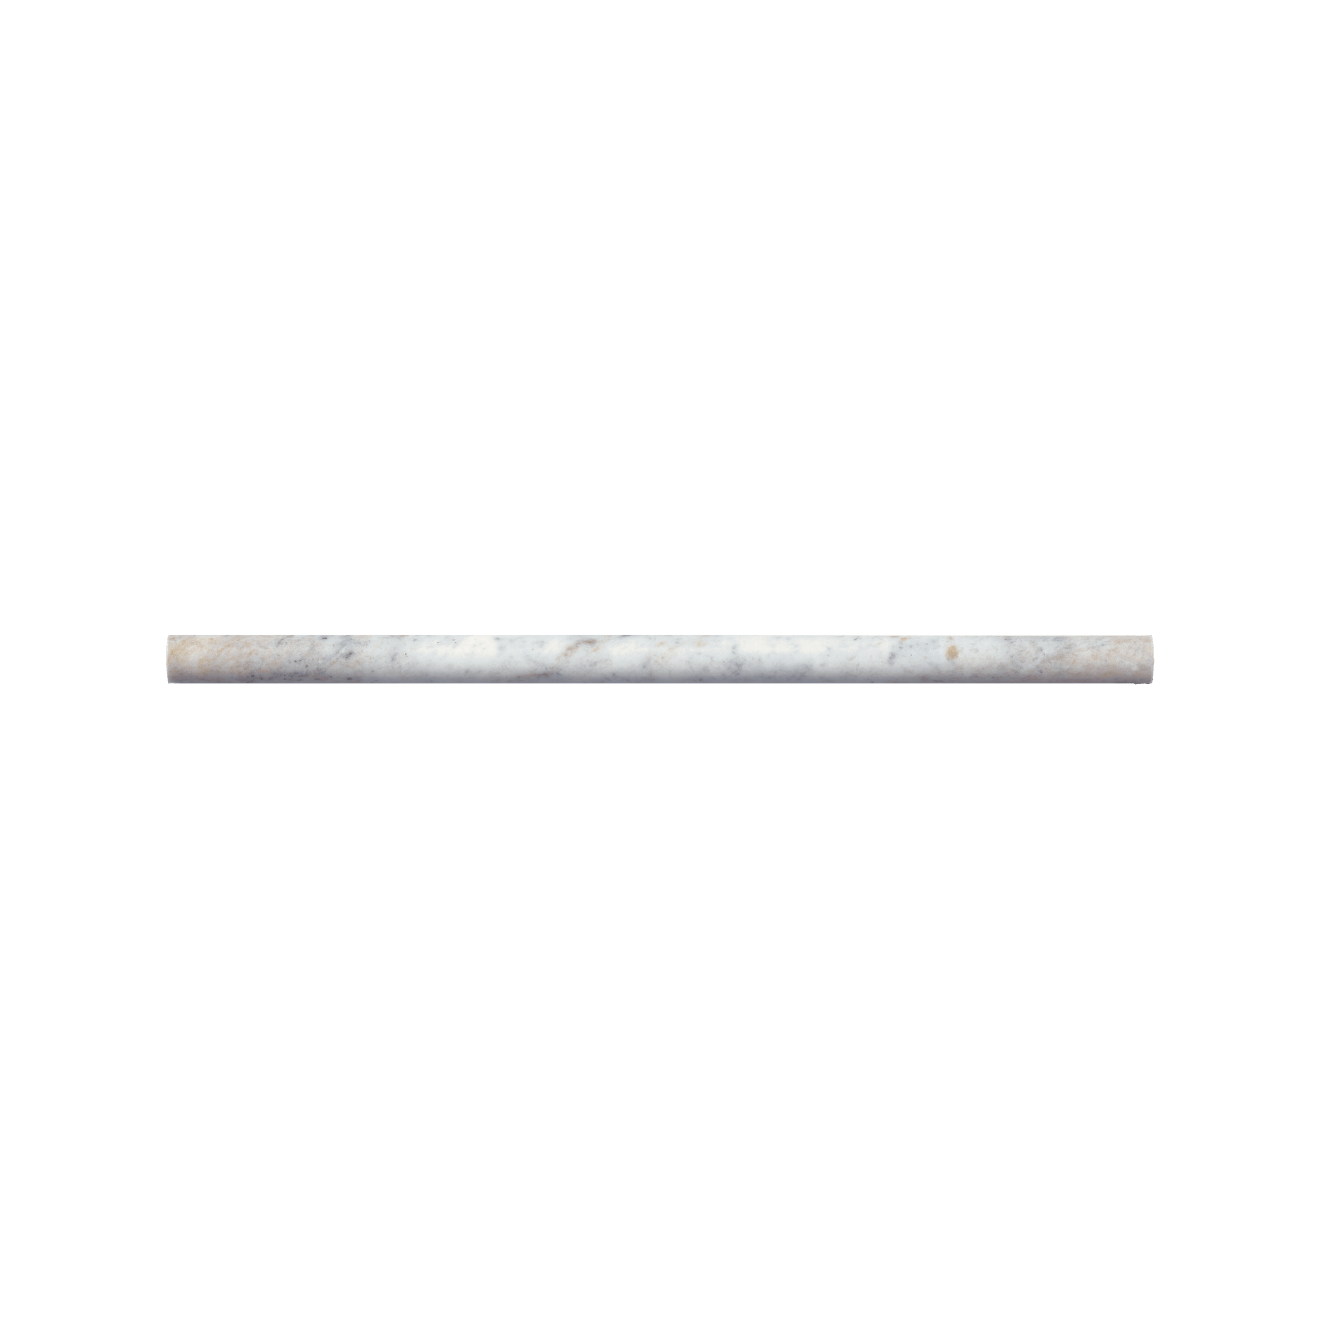 Bedrosians Marble 0.75" x 12" Marble Cane